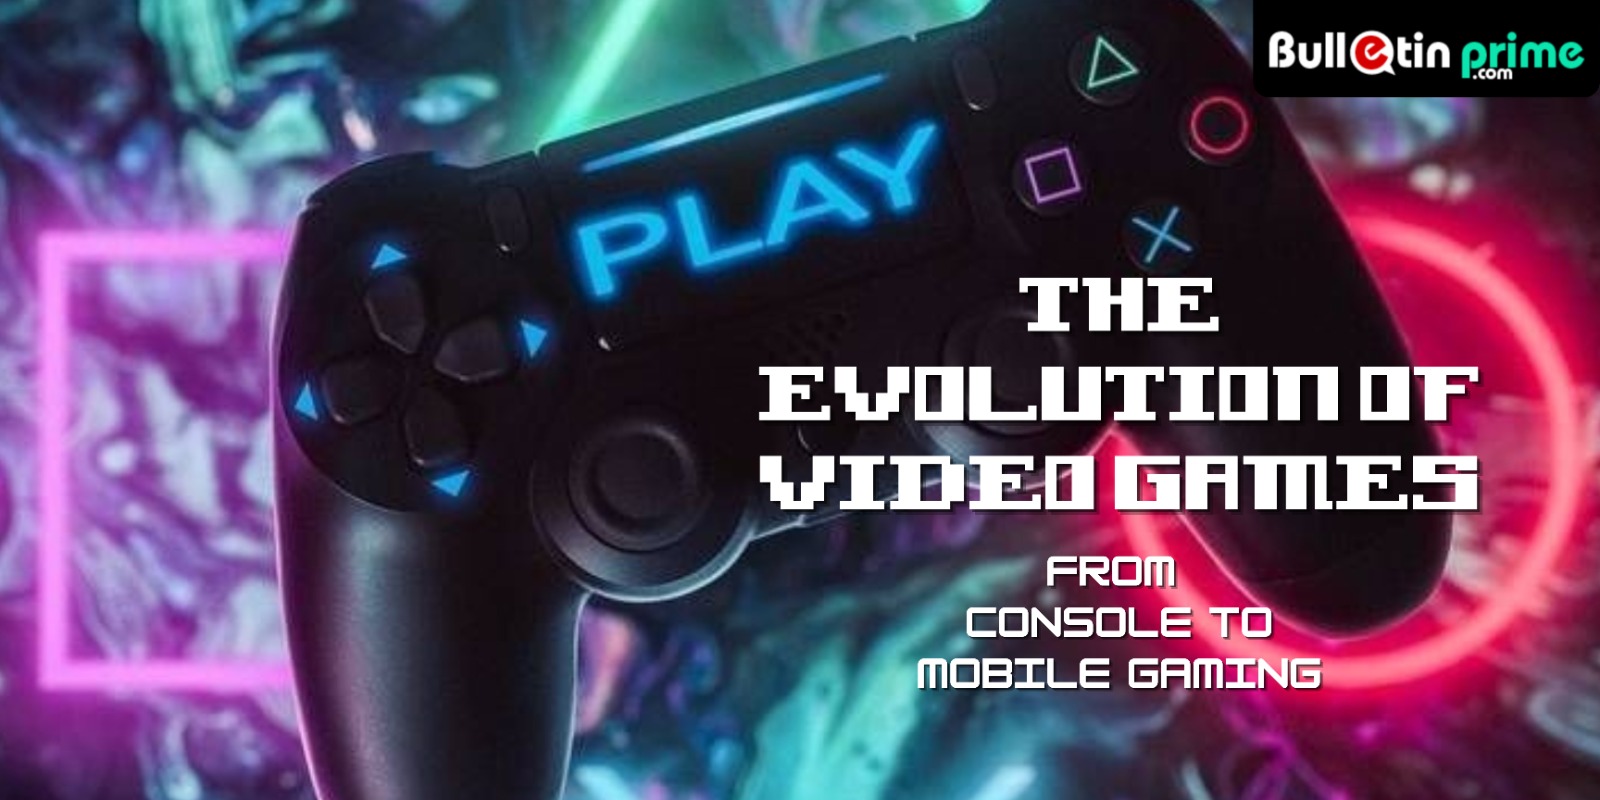 The Evolution of Video Games: From Console to Mobile Gaming